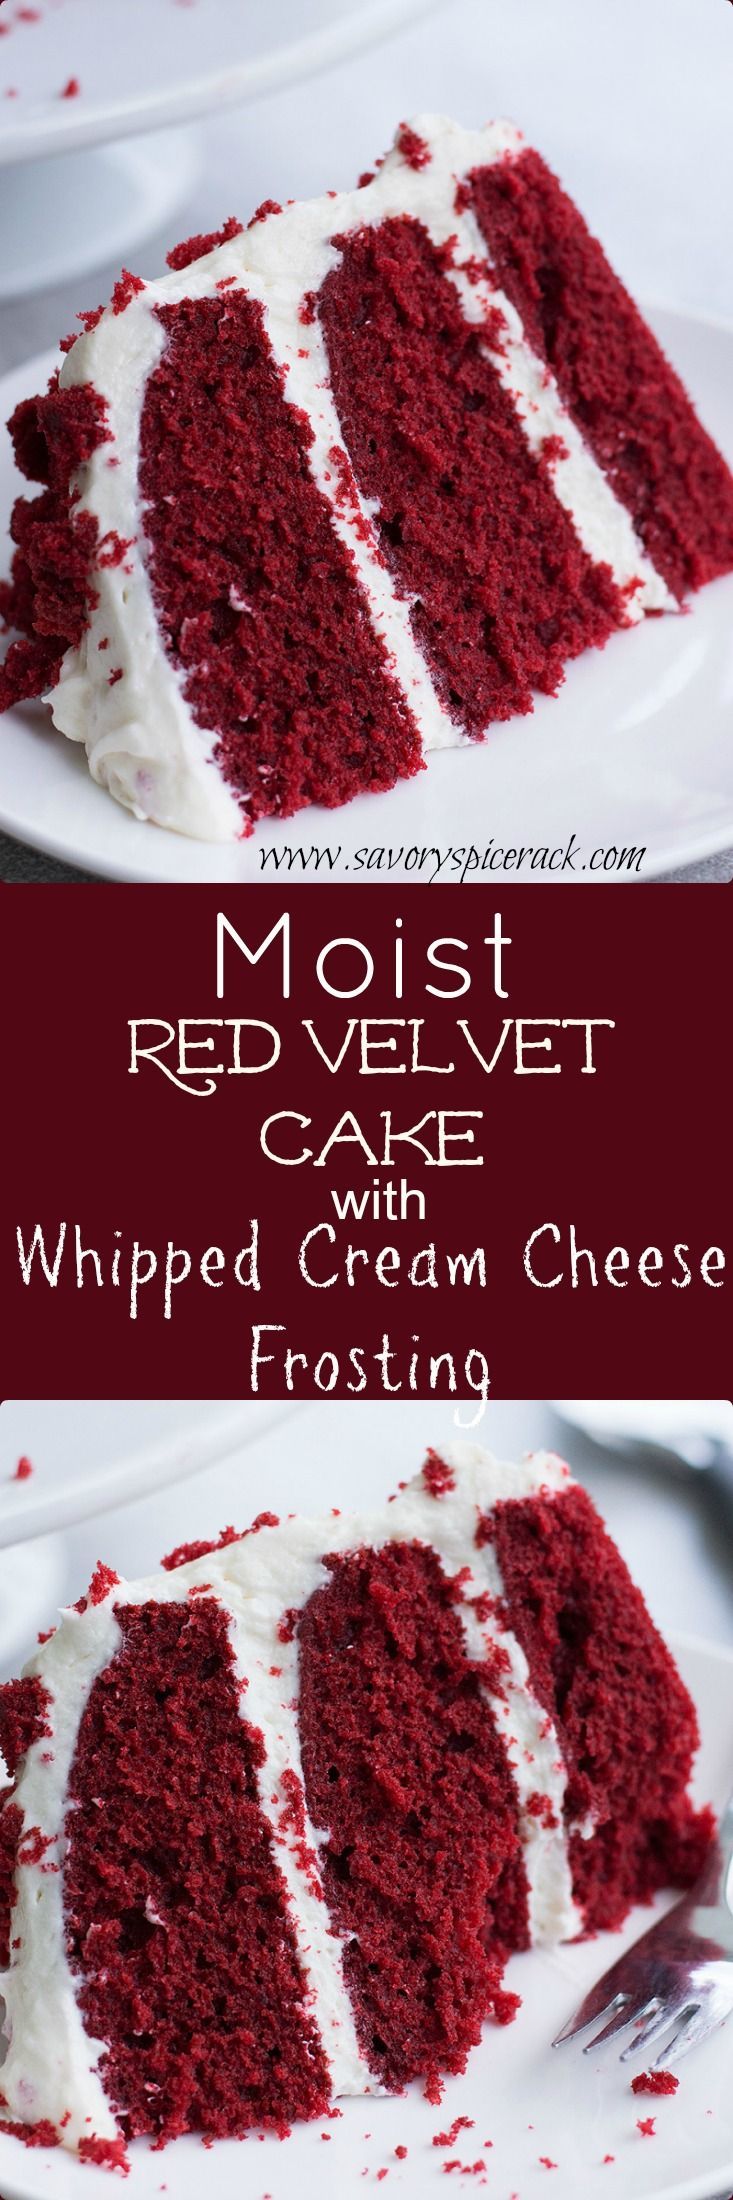 This red velvet cake is super moist and it has such a light and fluffy homemade cream cheese frosting.